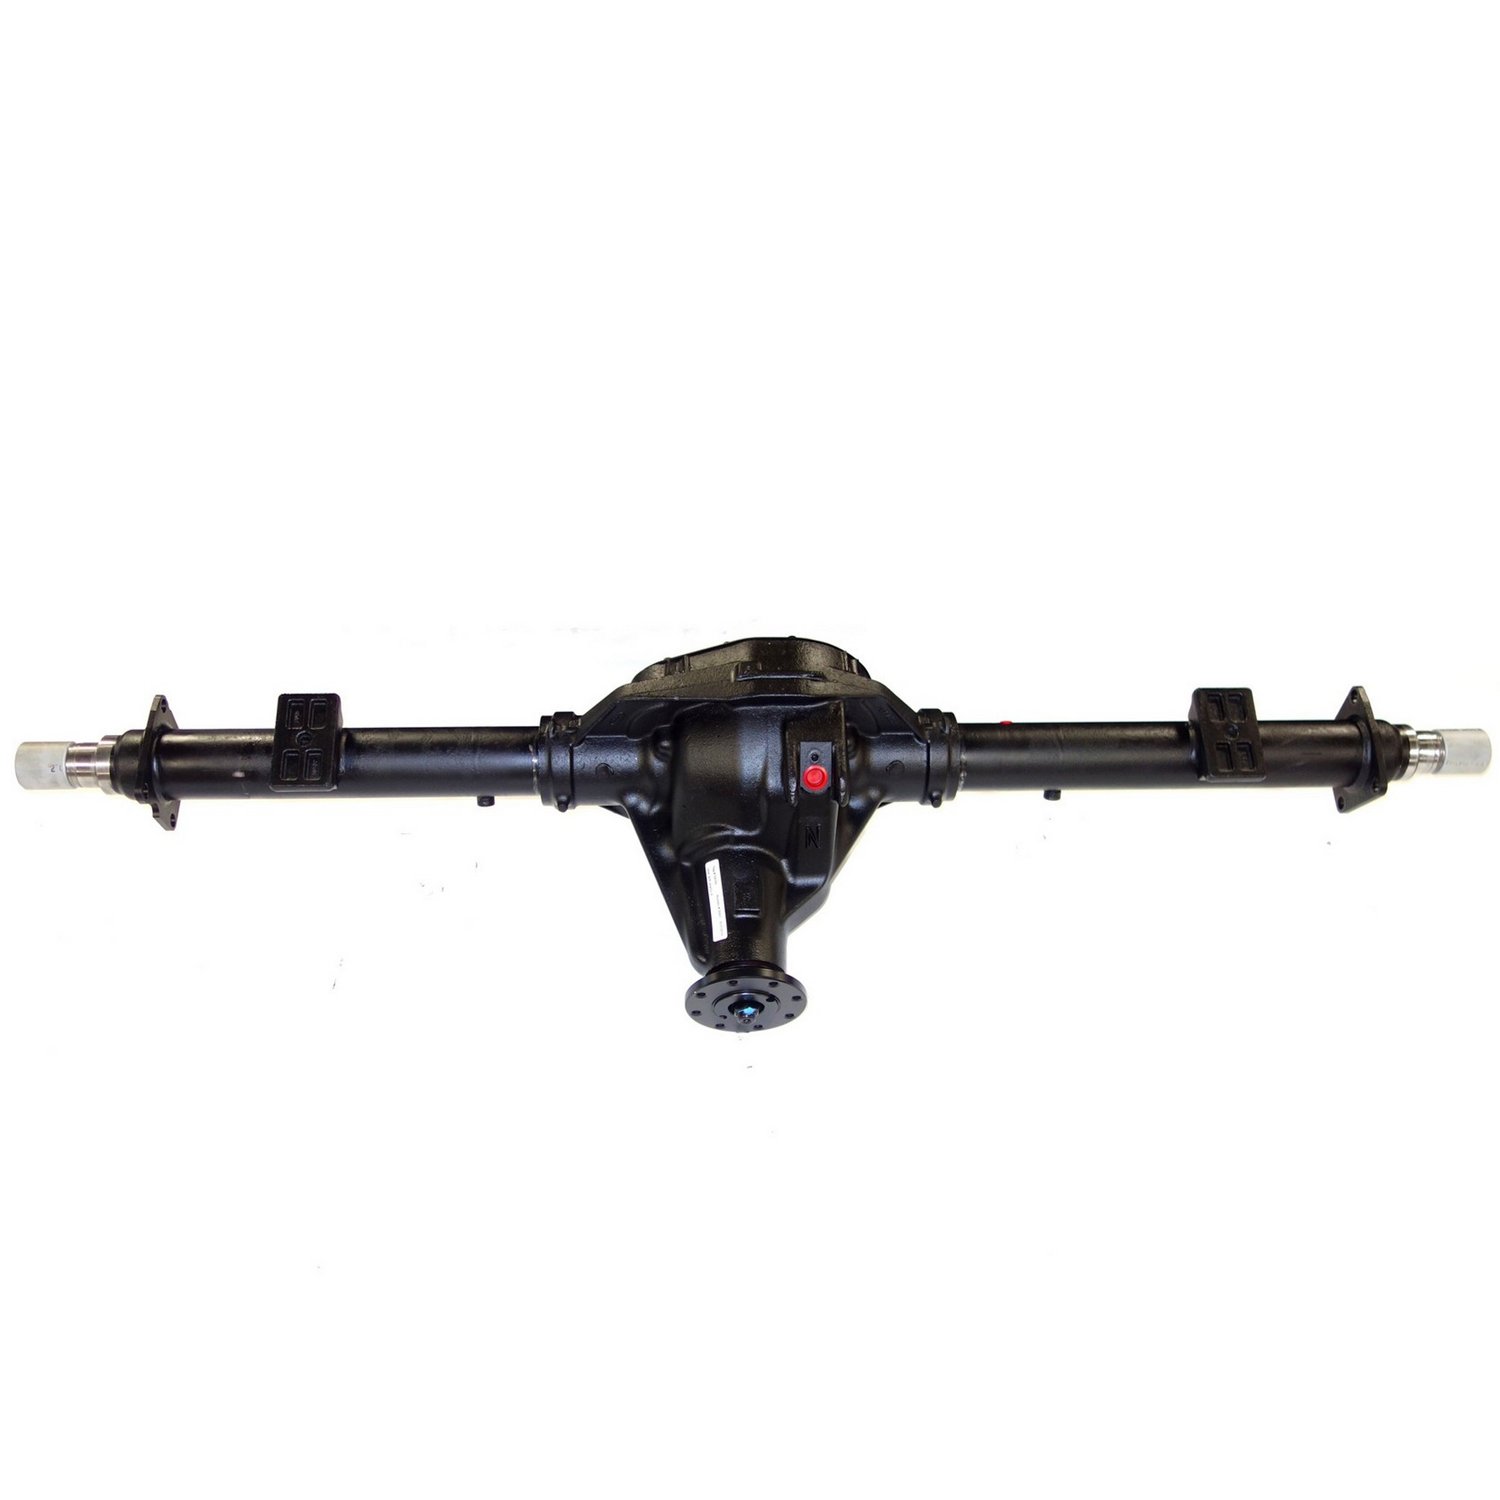 Remanufactured Complete Axle Assembly for 10.25" 87-88 F250 3.73 with ABS, Ff, Posi LSD